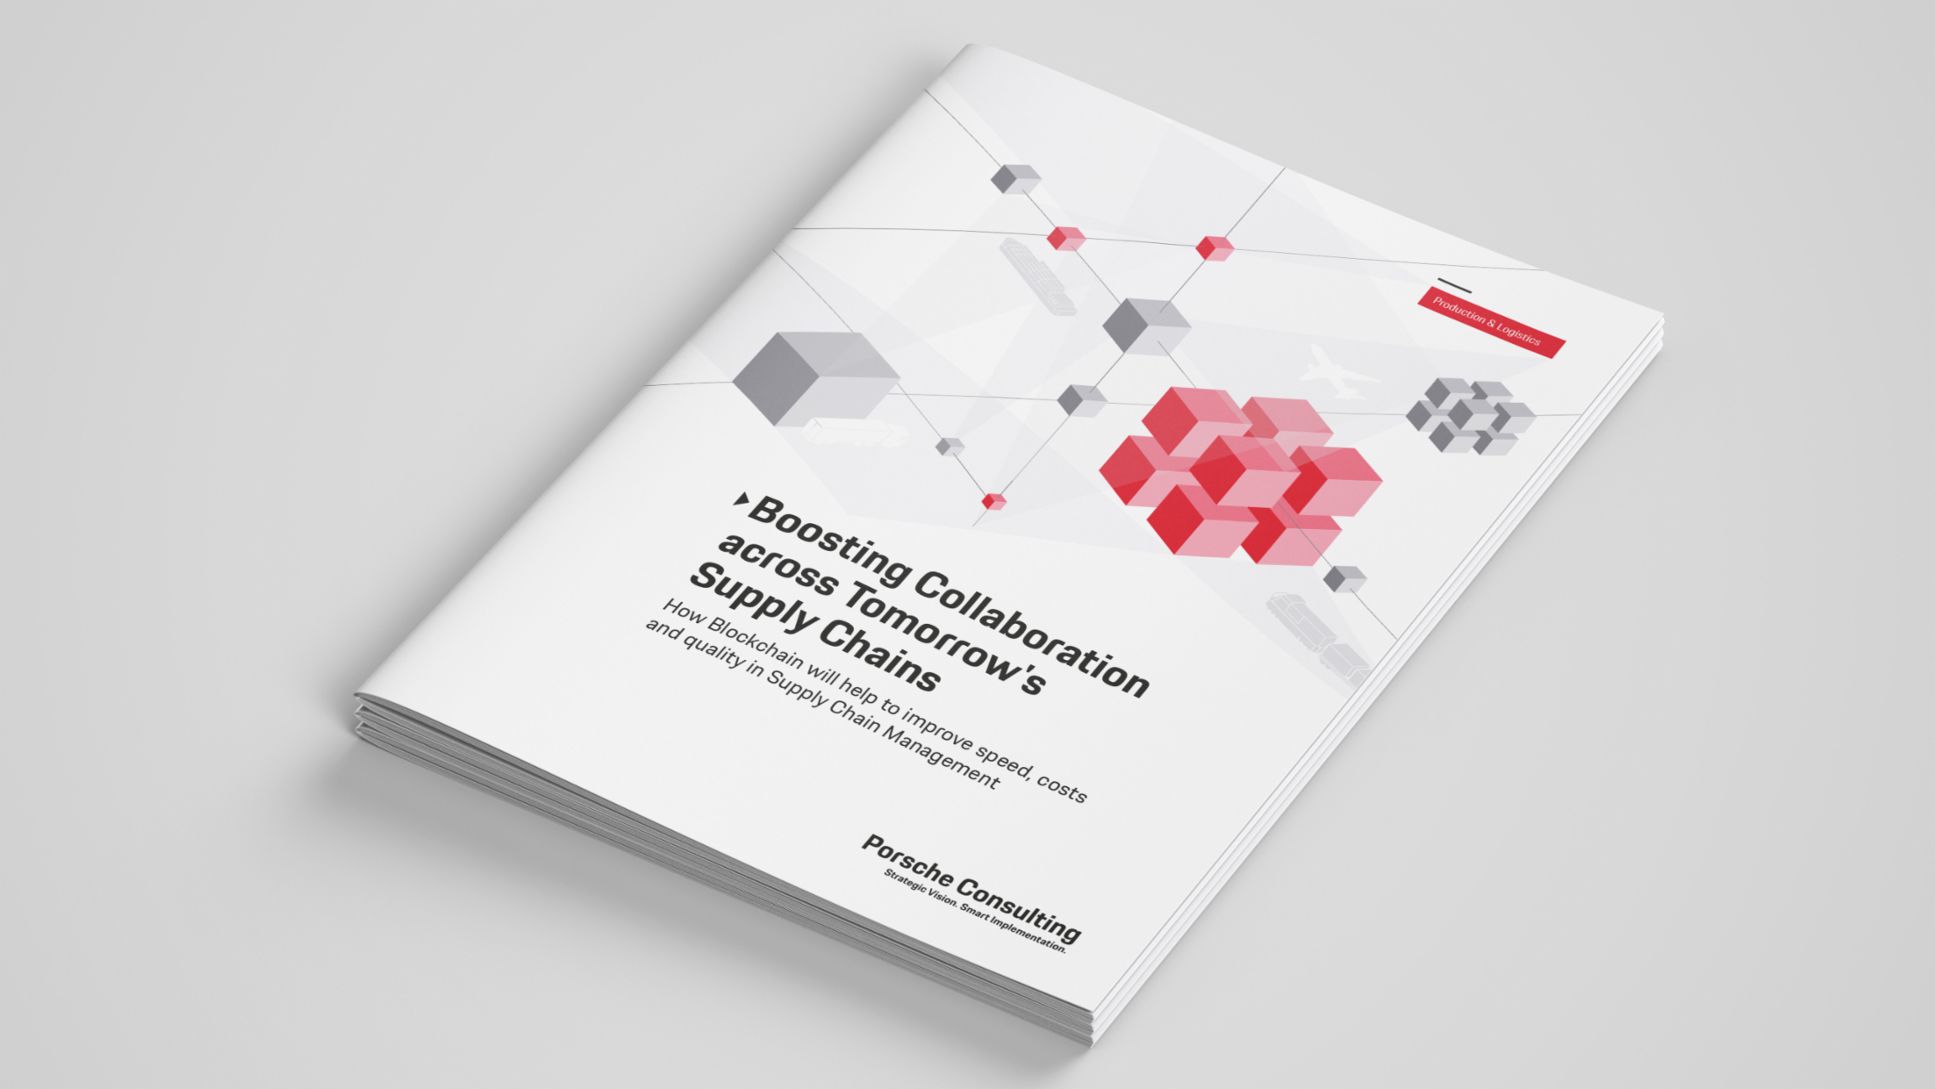 Boosting Collaboration across Tomorrow's Supply Chains, Whitepaper, 2020, Porsche Consulting GmbH